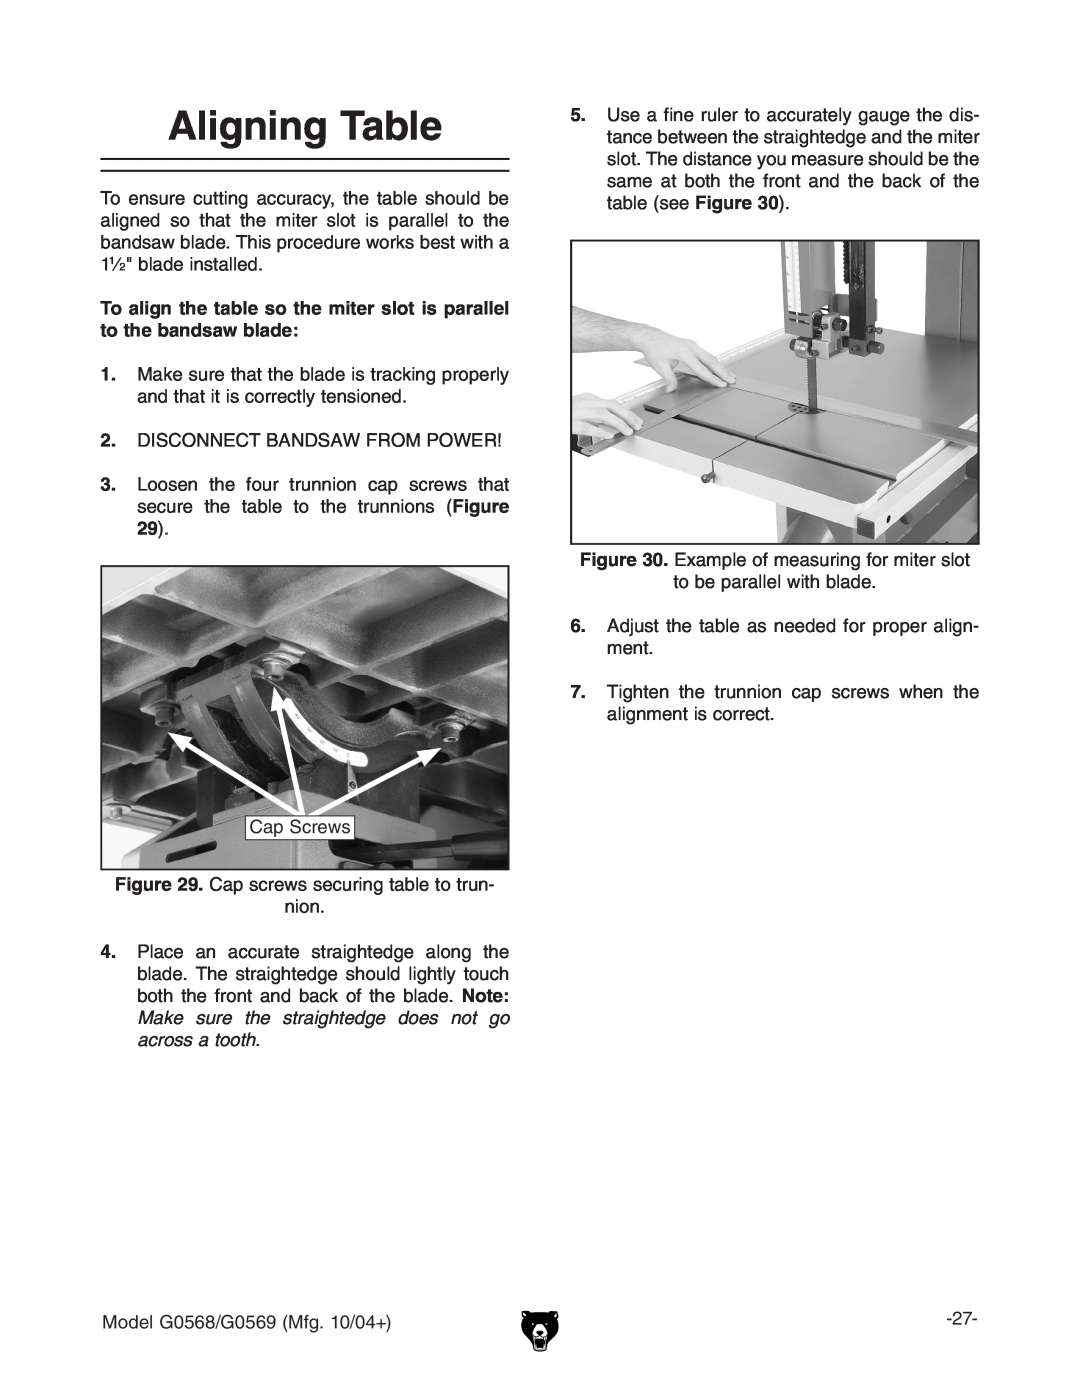 Grizzly G0568, G0569 owner manual Aligning Table, To align the table so the miter slot is parallel to the bandsaw blade 